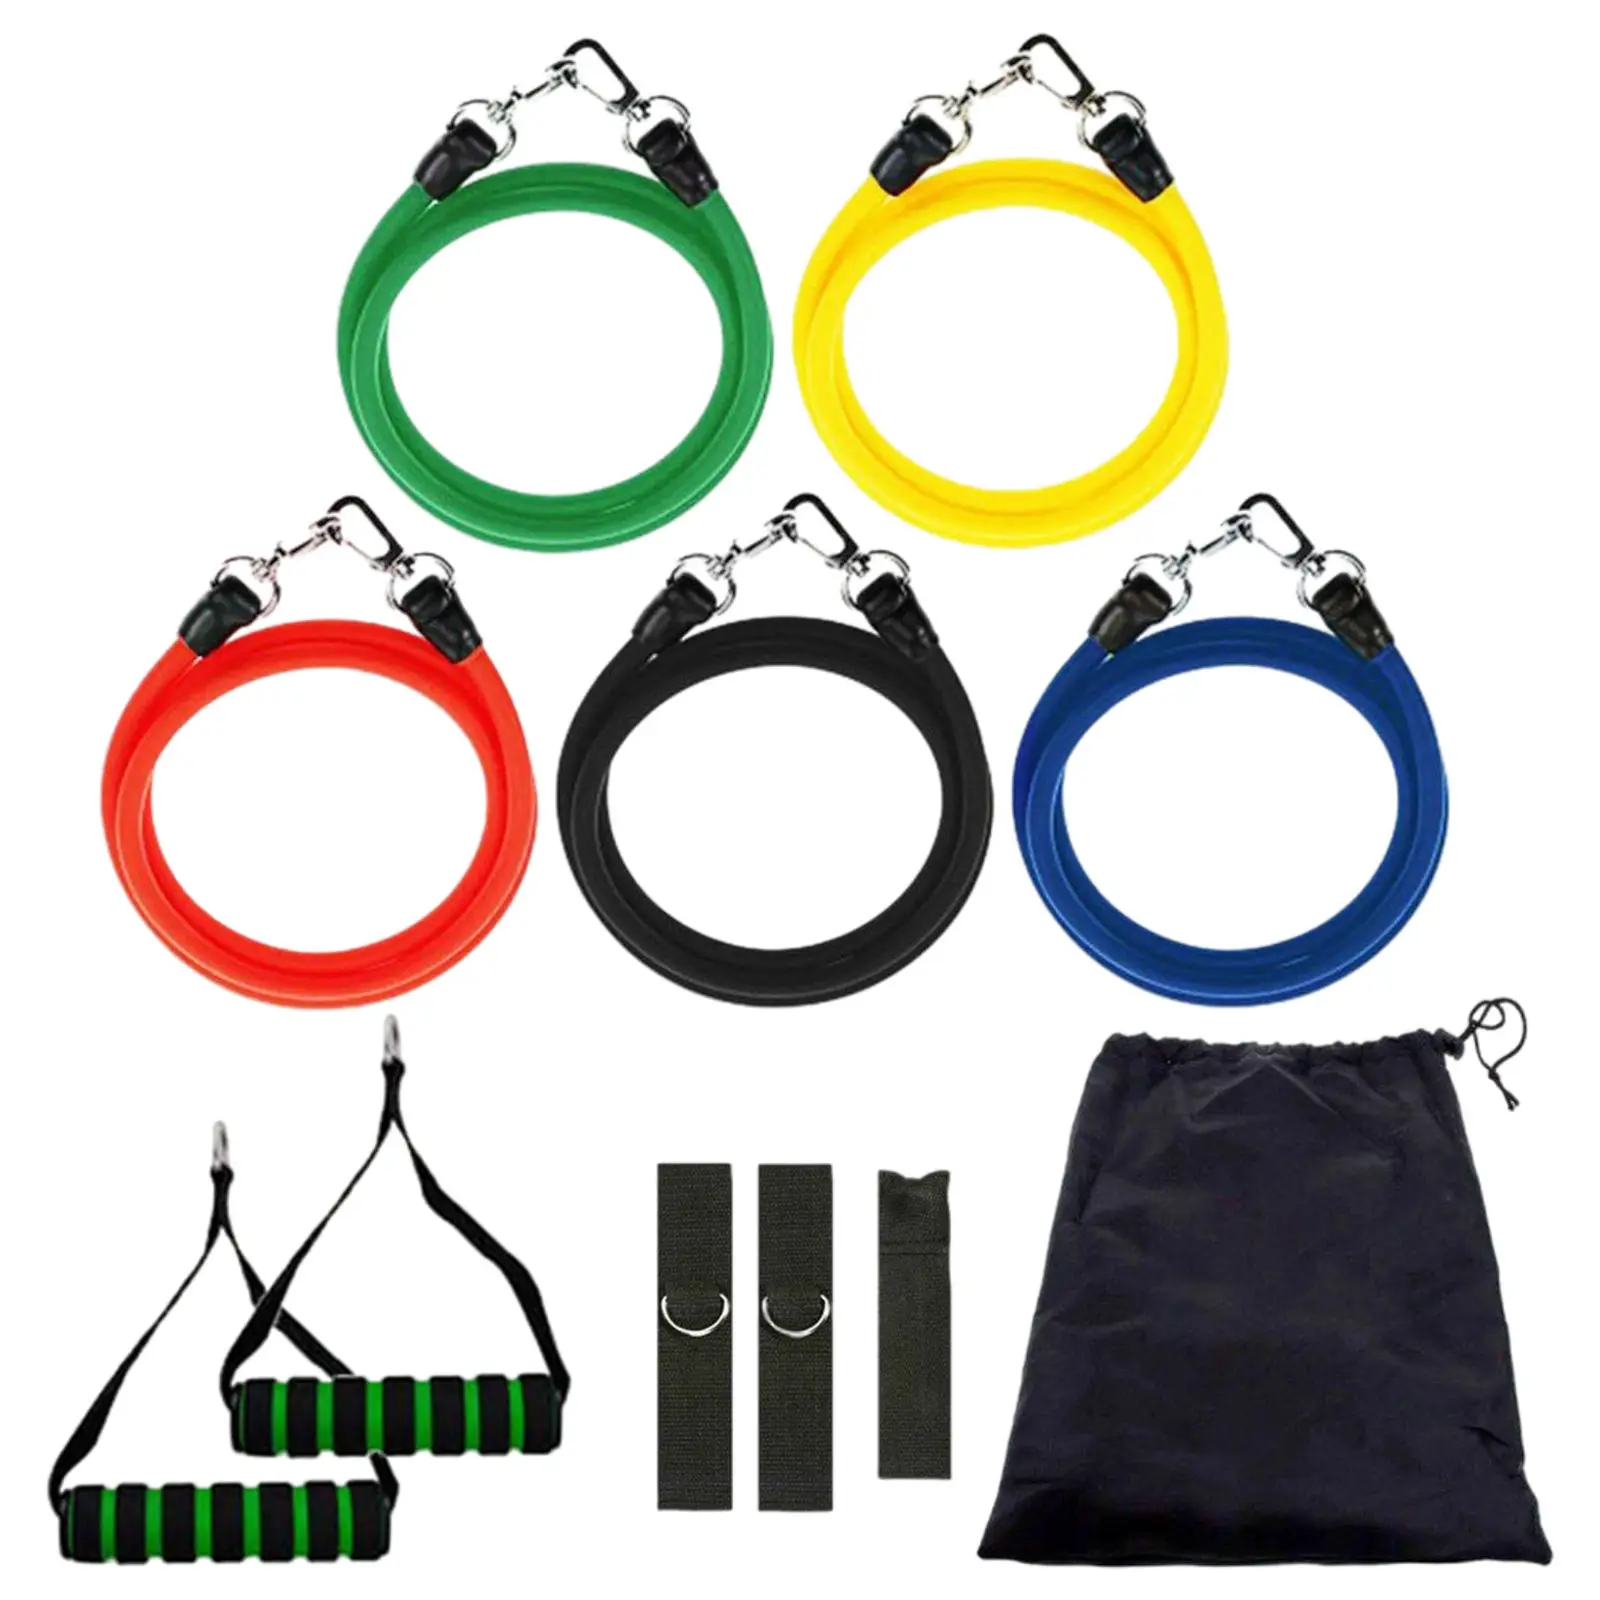 Resistance Bands Set (11Pcs) Exercise Bands for Yoga Home Workouts Home Gym